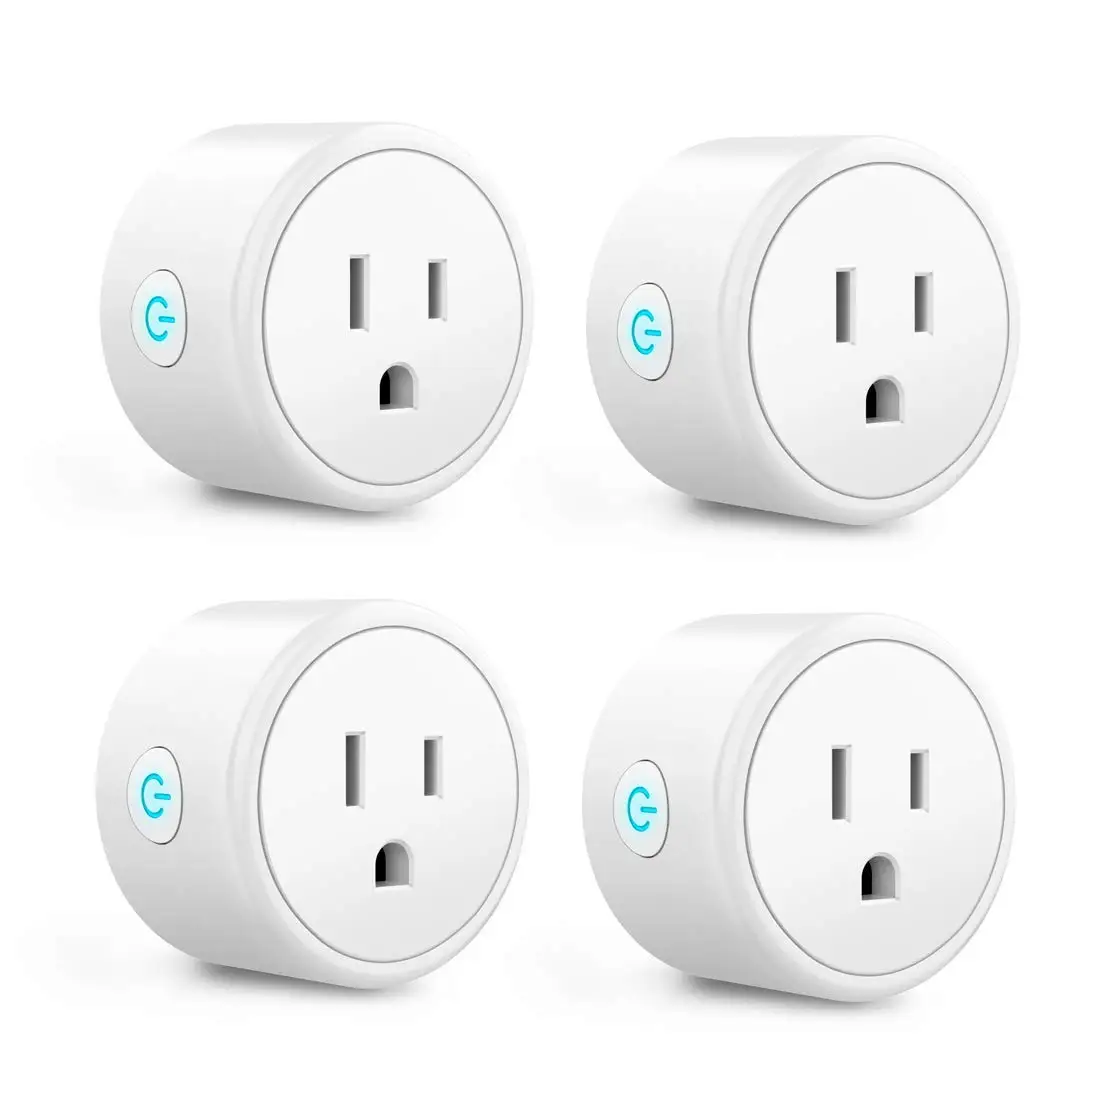 Mini Smart Plugs Bluetuth WiFi Outlet Compatible with Alexa Google Home Assistant Remote Control with Timer Function Switch